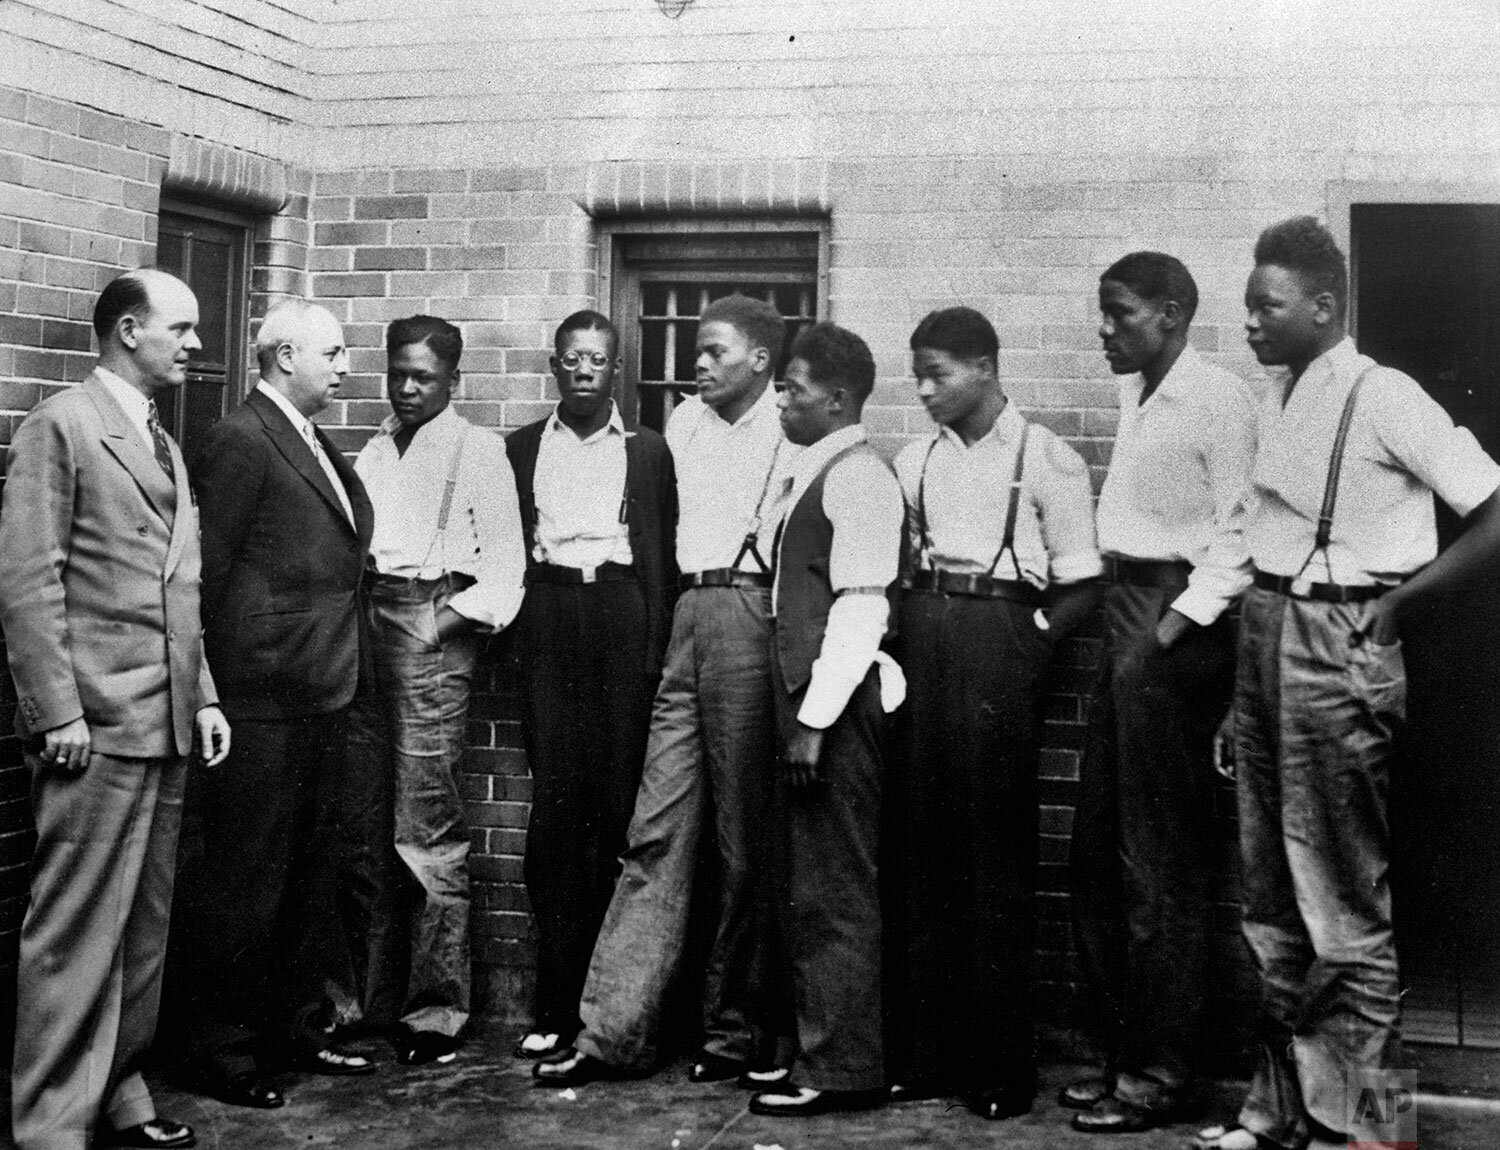  In this May 1, 1935 photo, attorney Samuel Leibowitz from New York, second left, meets with seven of the Scottsboro defendants at the jail in Scottsboro, Ala. just after he asked the governor to pardon the nine youths held in the case. From left are